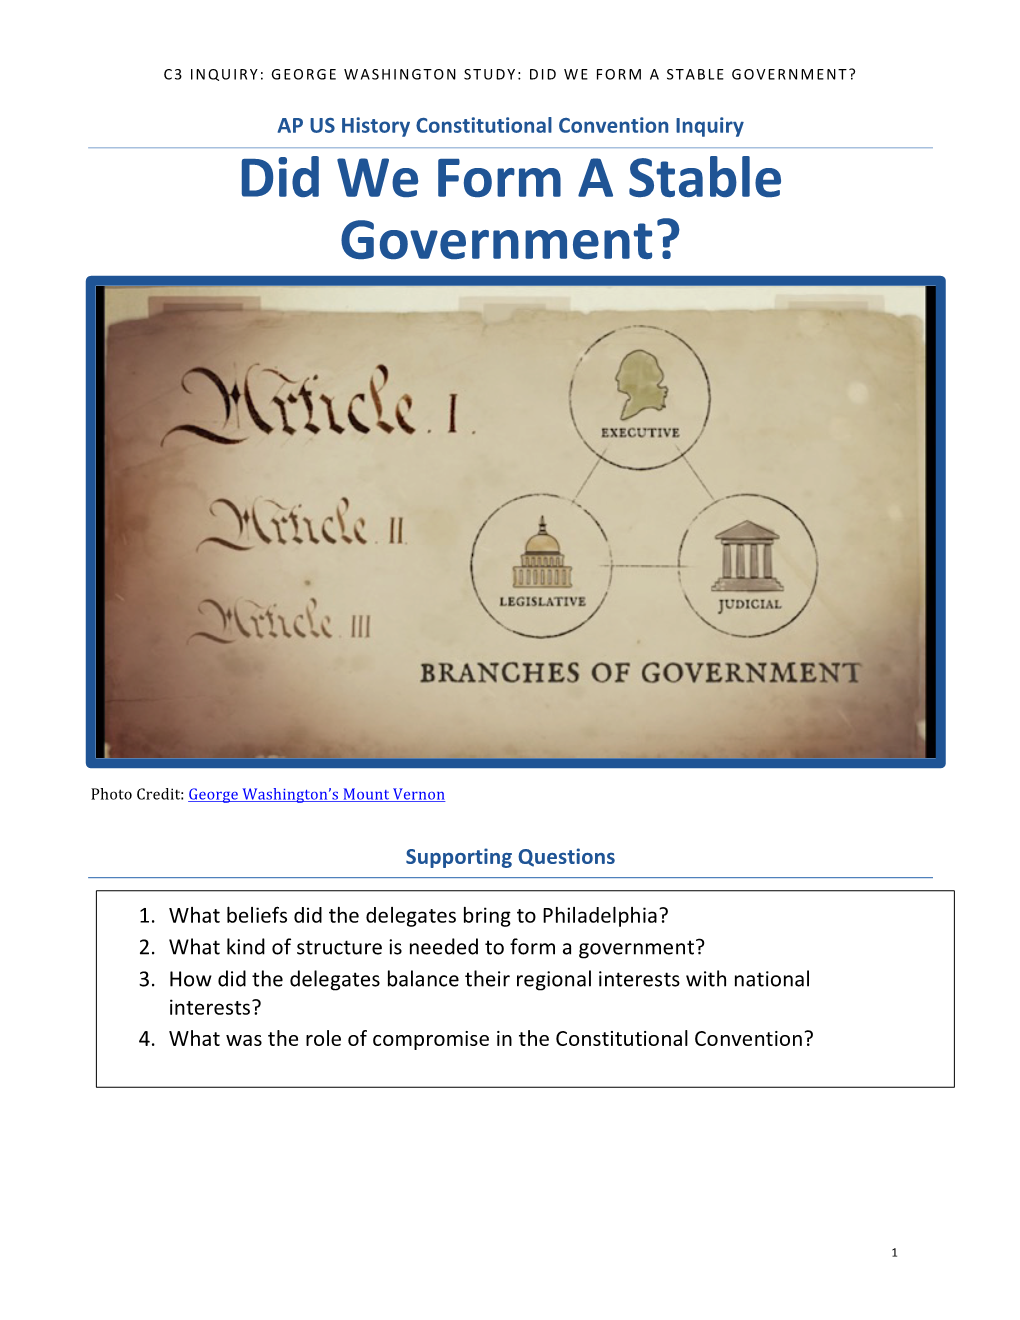 Did We Form a Stable Government?